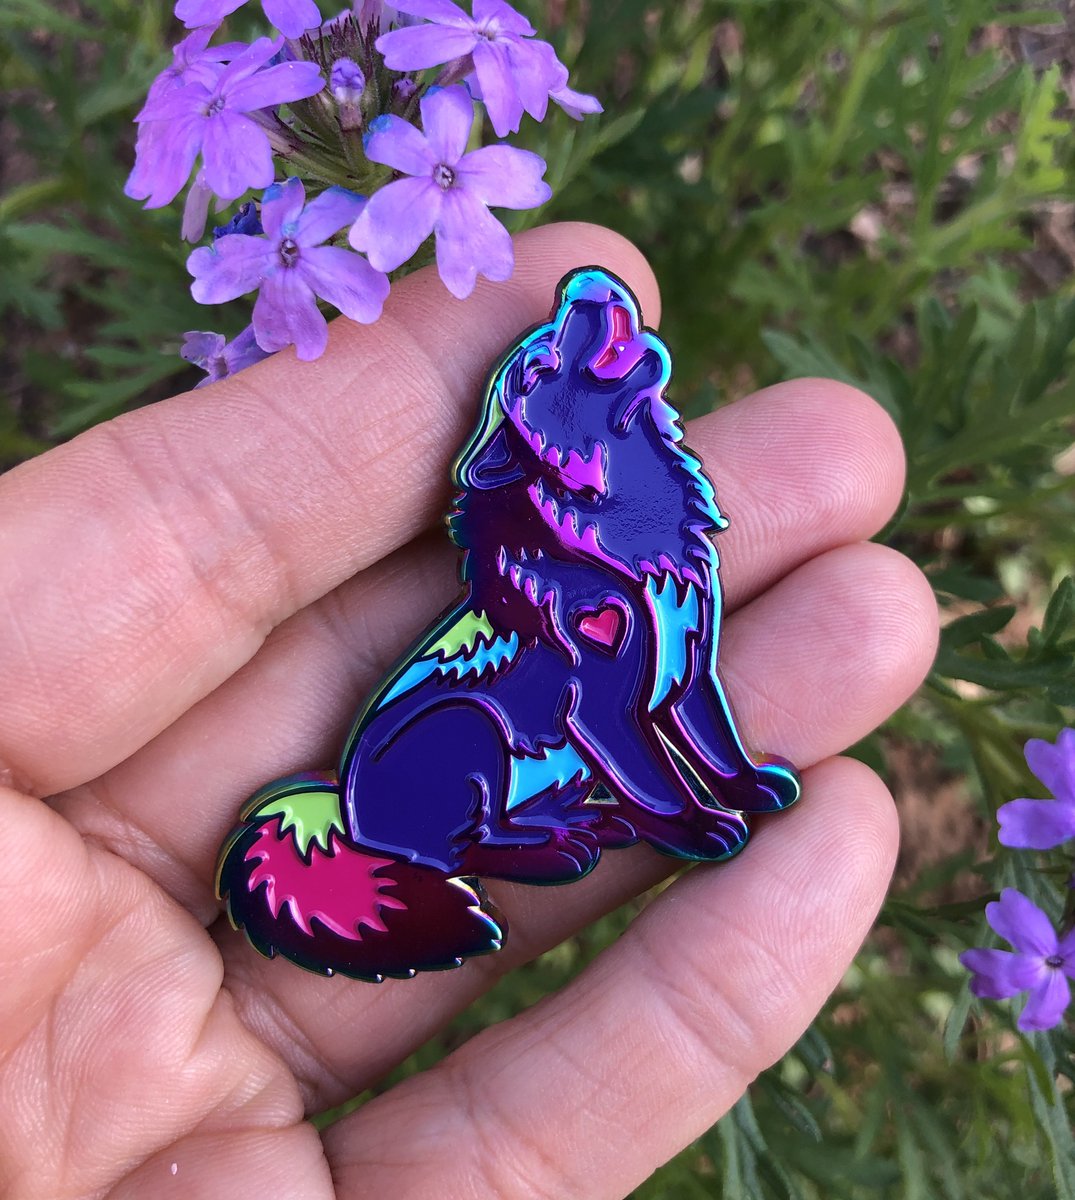 Heart Song is feelin' those springtime vibes 🌸🪻🌷🌺
Get this cutie in the 🧵👇
#wuffies #rainbows #springtime #wolf #wolfpin #cutie #kawaii